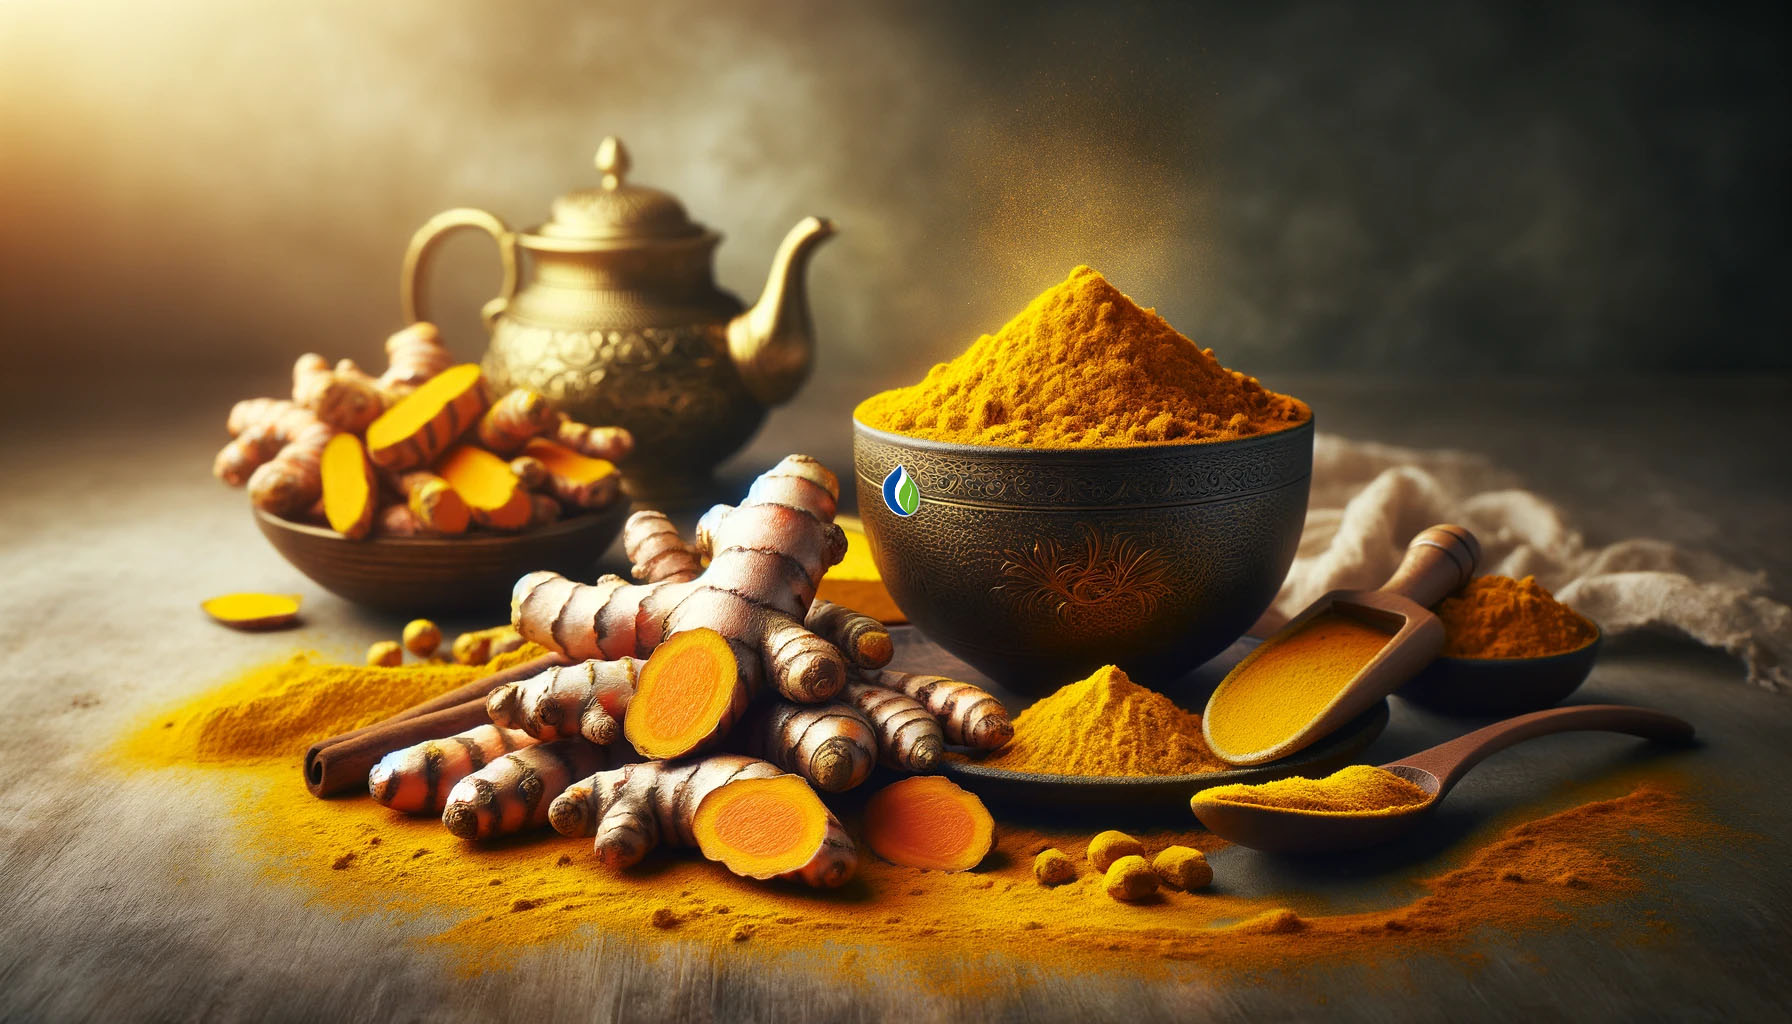 Turmeric: The Golden Spice with Powerful Health Benefits